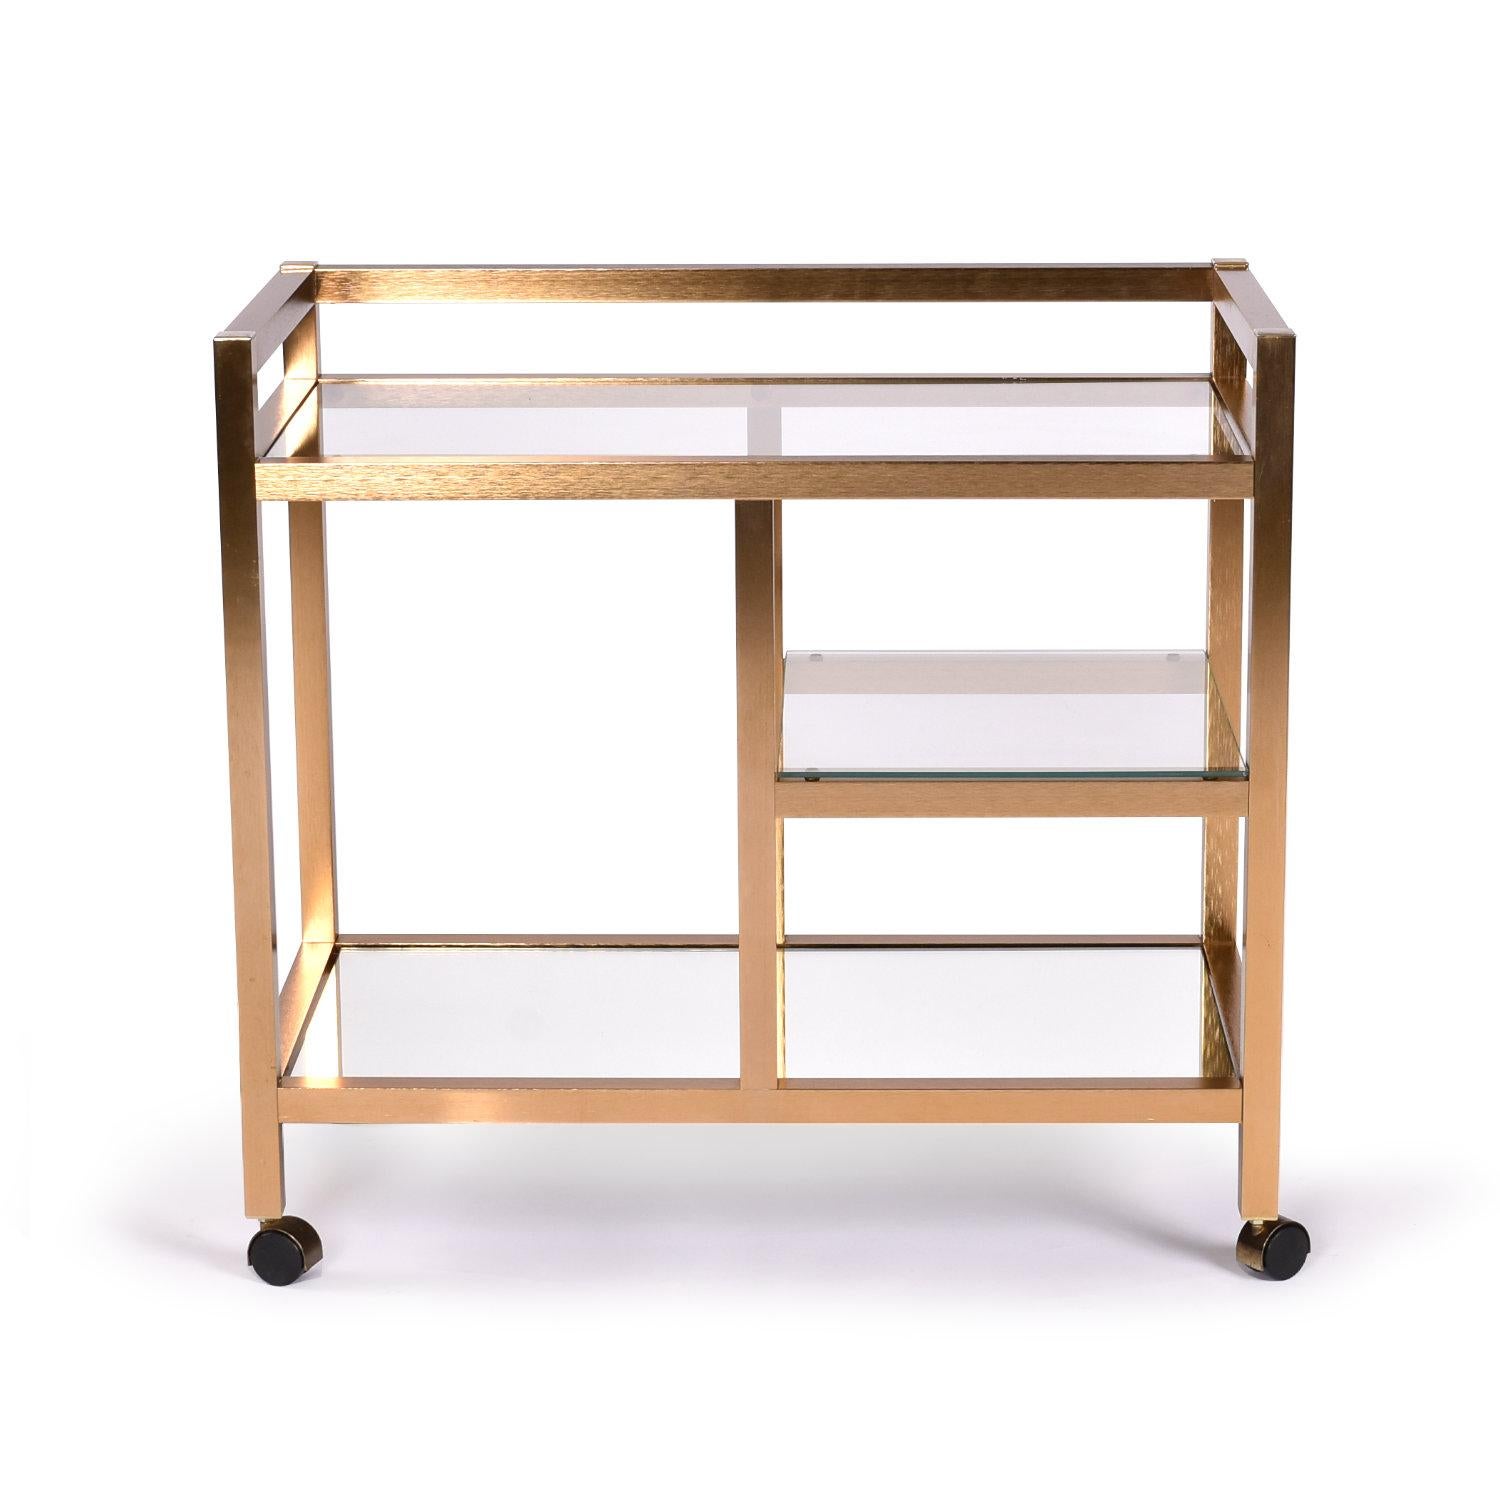 Stunning Nineteen-Laties vintage gold colored bar cart with glass shelves and mirror bottom. The distinctive cart has an atypical warm-copper tint to the metallic gold finish. Take a close look at the frame to see that the metal is actually textured